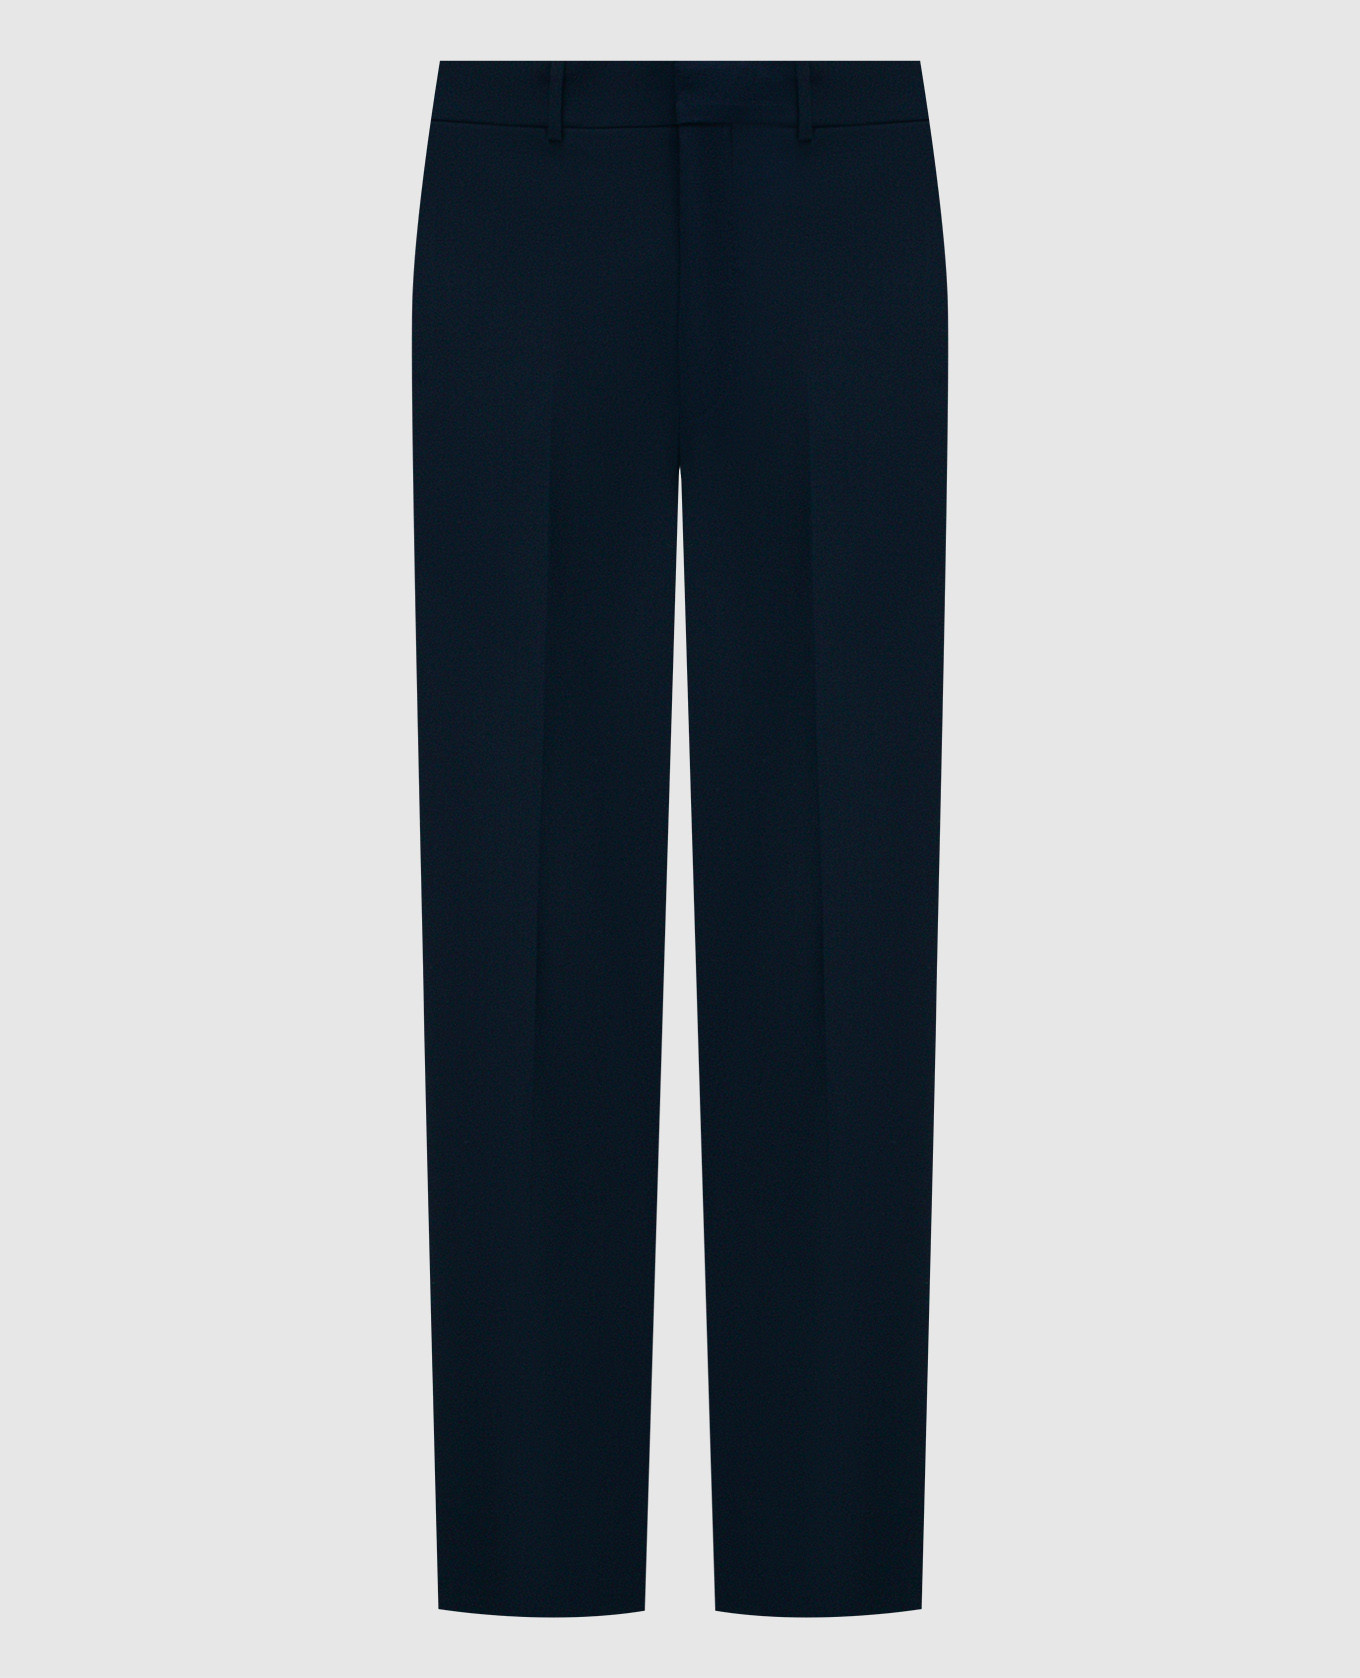 Blue trousers with OW logo embroidery